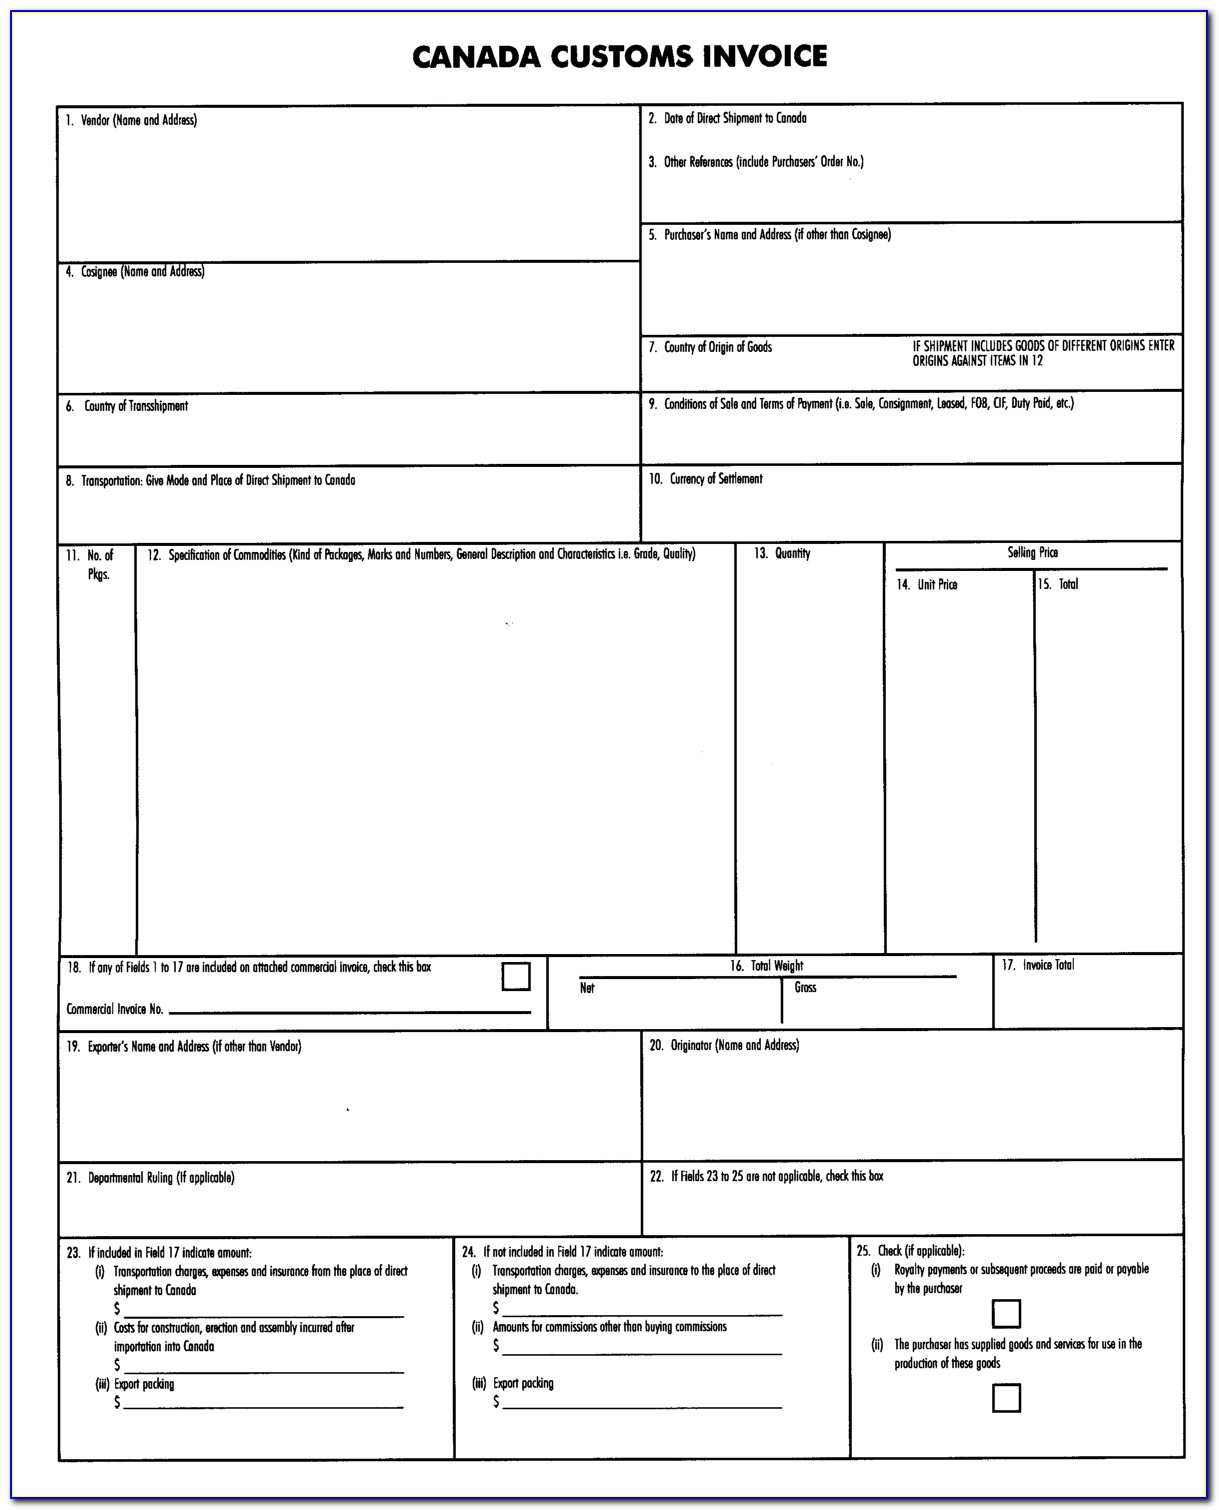 Customs Invoice Template Us To Canada